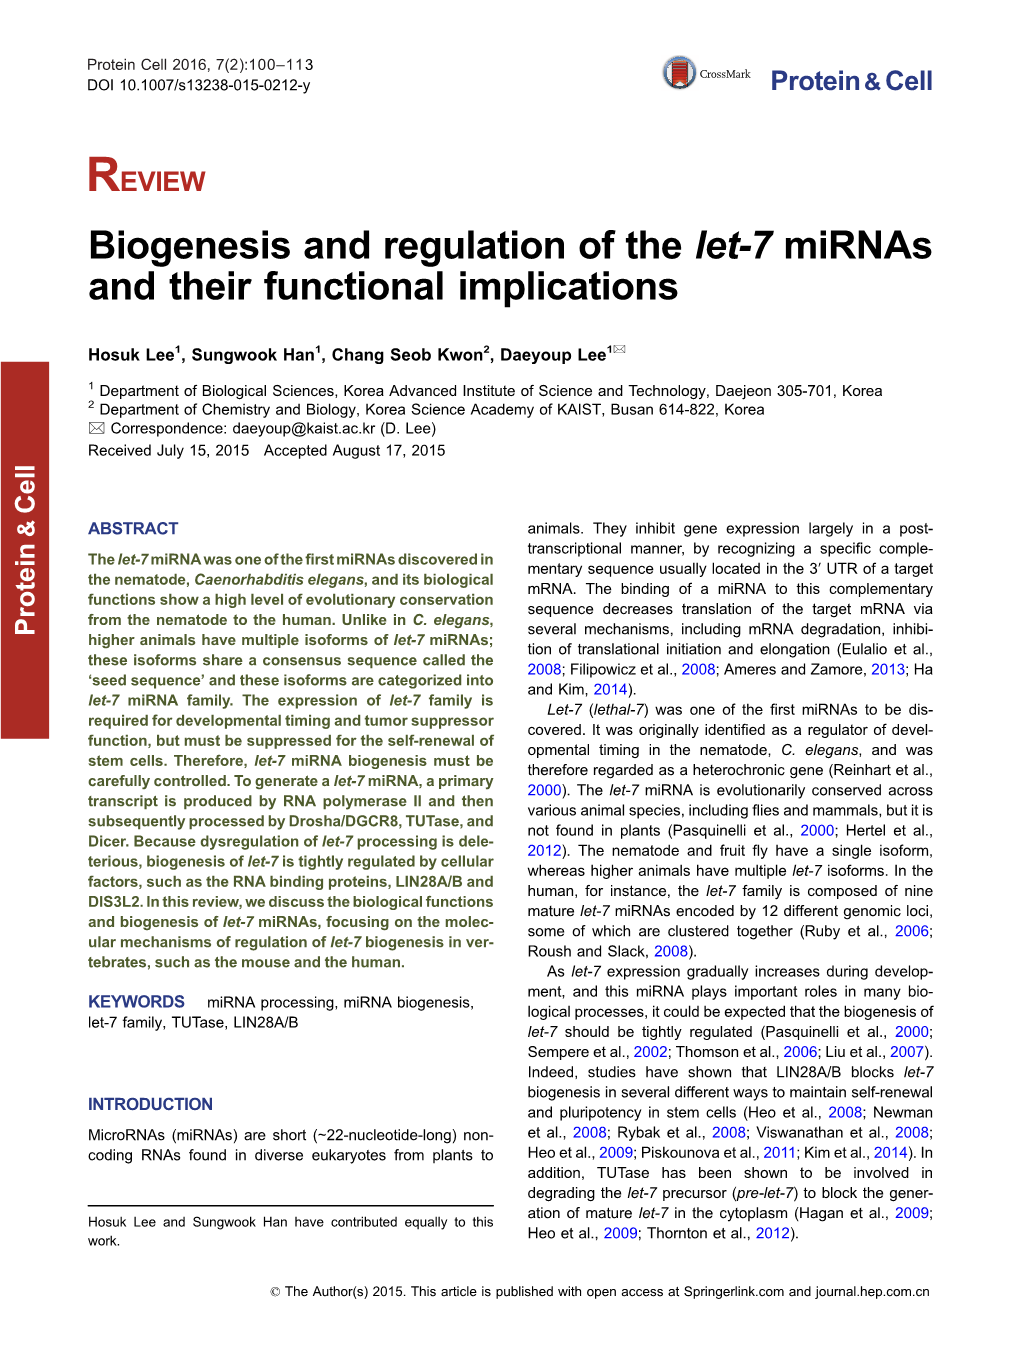 Biogenesis and Regulation of the Let-7 Mirnas and Their Functional Implications